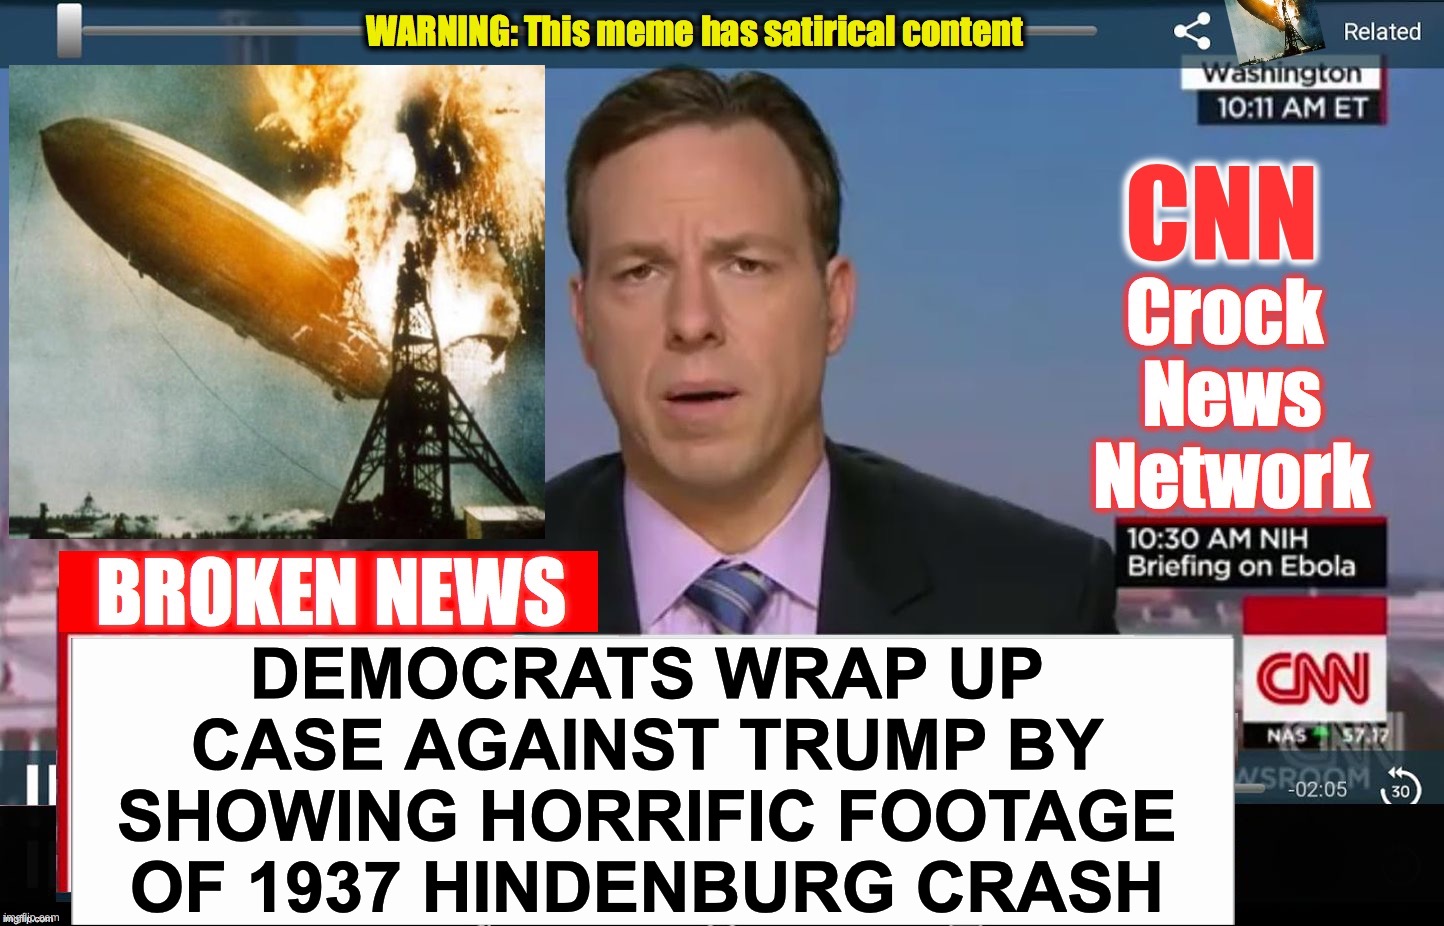 Hey, they might as well throw in the kitchen sink... | DEMOCRATS WRAP UP CASE AGAINST TRUMP BY SHOWING HORRIFIC FOOTAGE OF 1937 HINDENBURG CRASH | image tagged in cnn crock news network,trump,corrupt,democrats | made w/ Imgflip meme maker